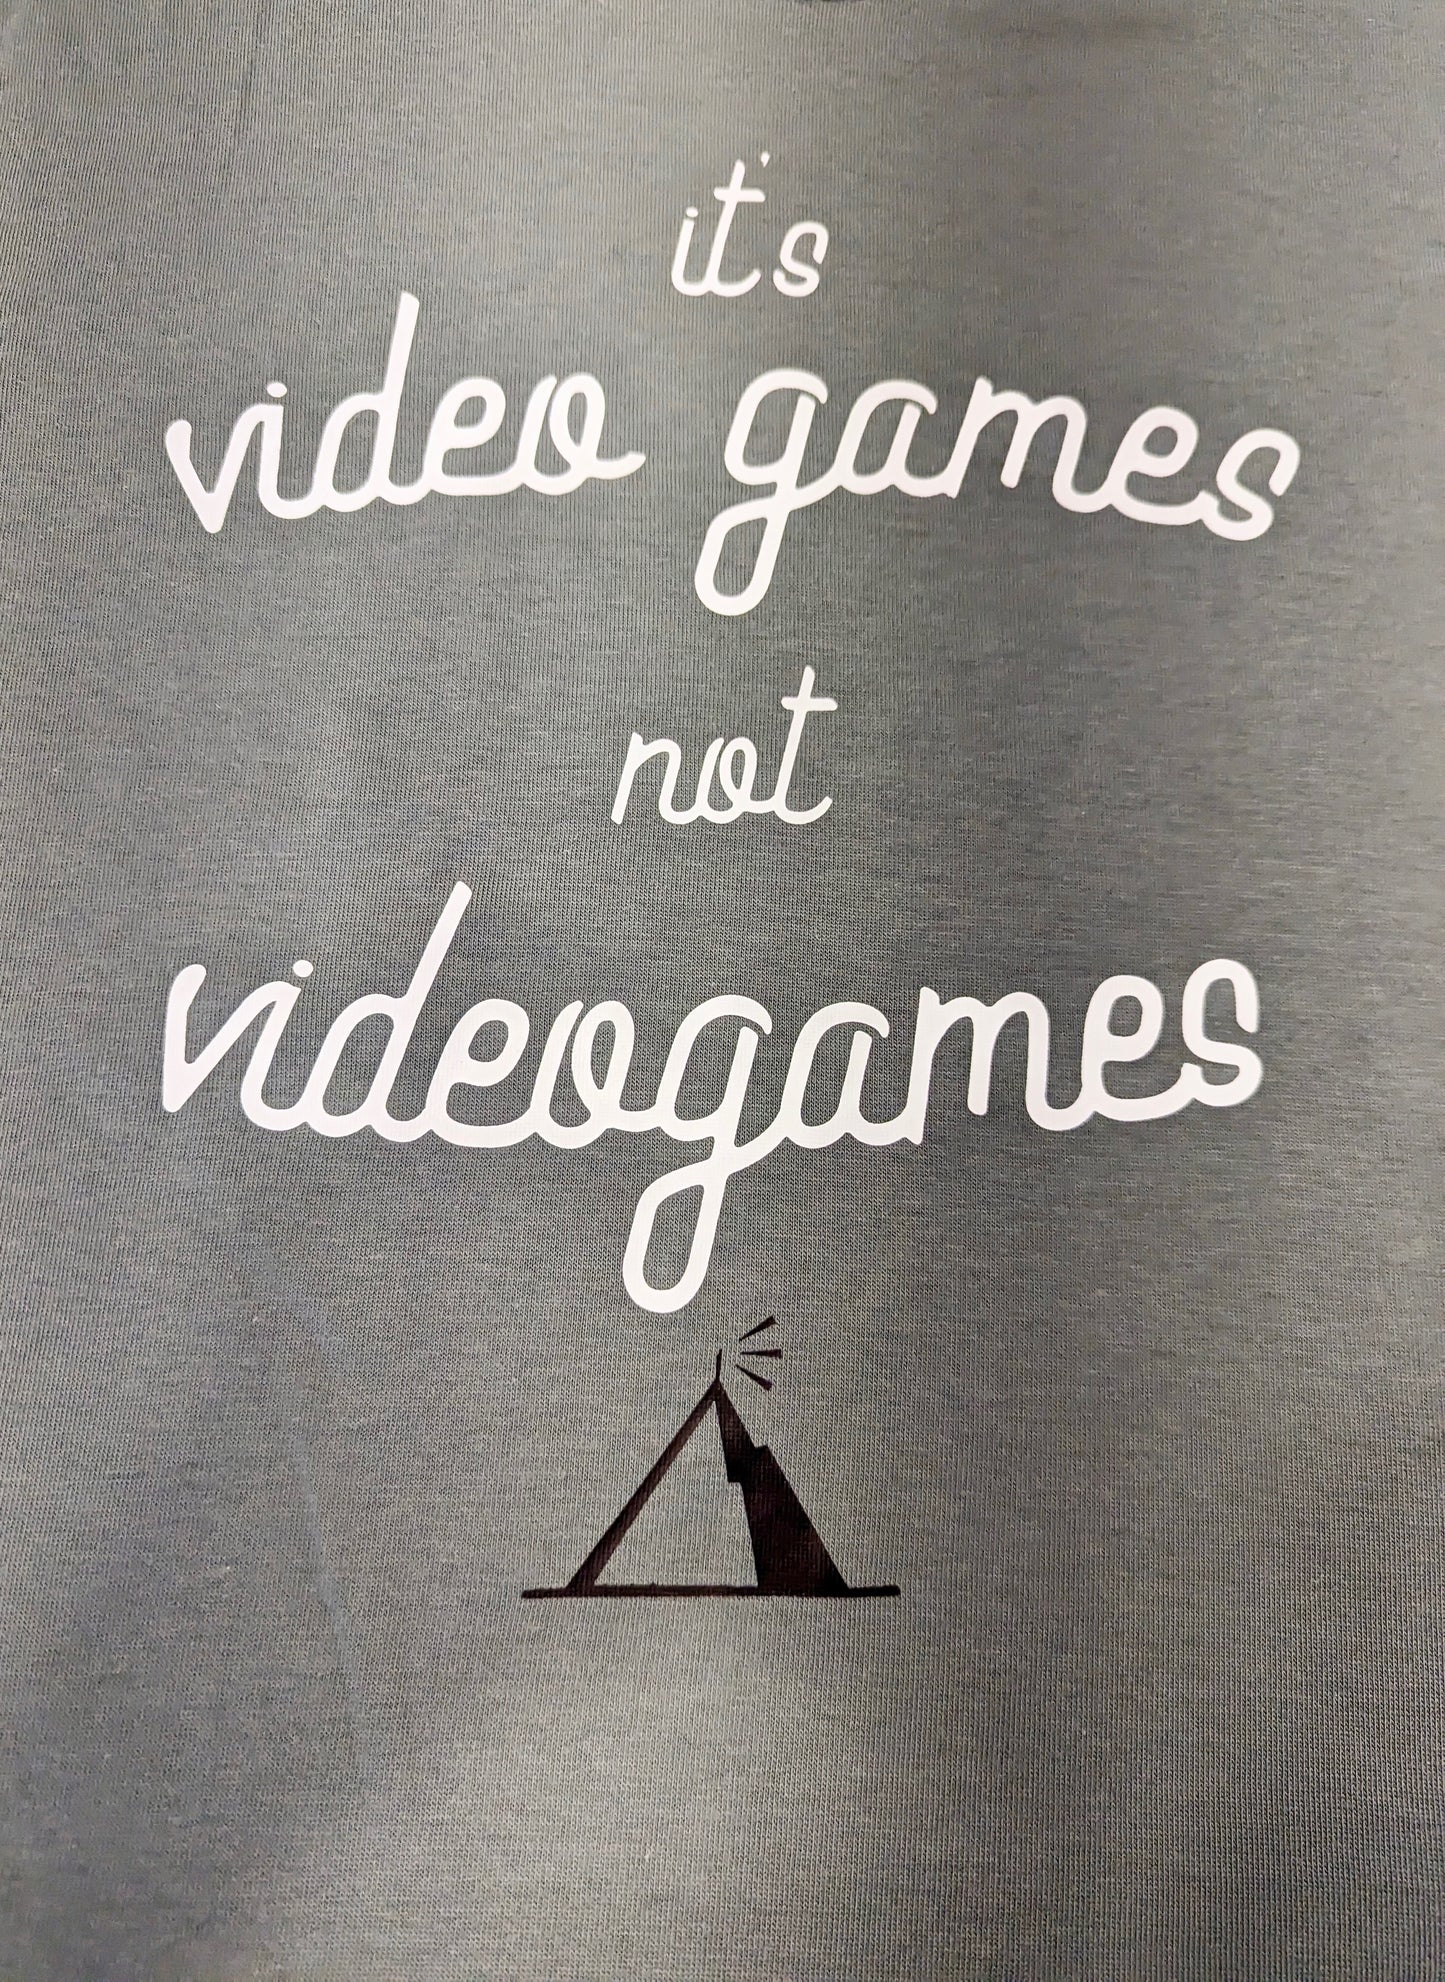 A Sage Green T-Shirt, with cursive writing on it in white. In lowercase letters the first line reads “it’s”, the second line “video games” using two words, the third line “not” and the fourth line “videogames” spelt as one word. In the centre below the text is the Mighty Yell logo in black which features the illustration of a mountain and a person on top yelling. There are three small lines coming out of the person’s mouth. 